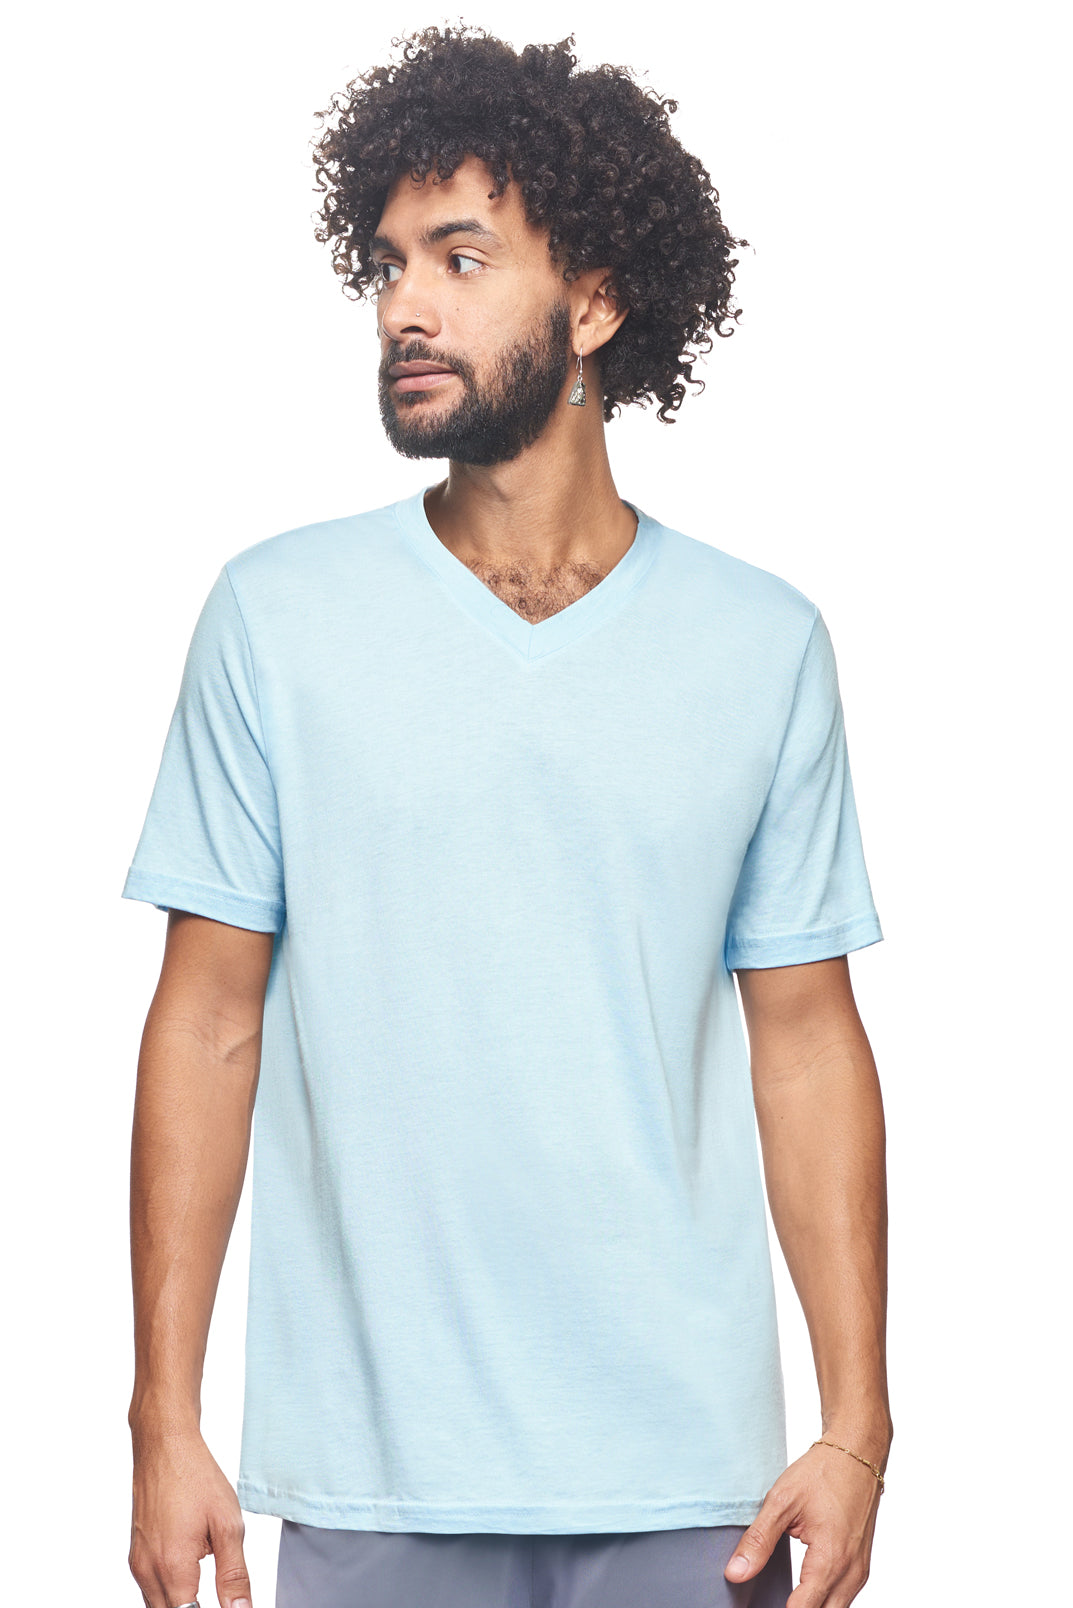 Expert Brand Retail Sustainable Eco-Friendly Apparel Micromodal Cotton Men's V-neck T-Shirt Made in USA light blue#color_light-blue